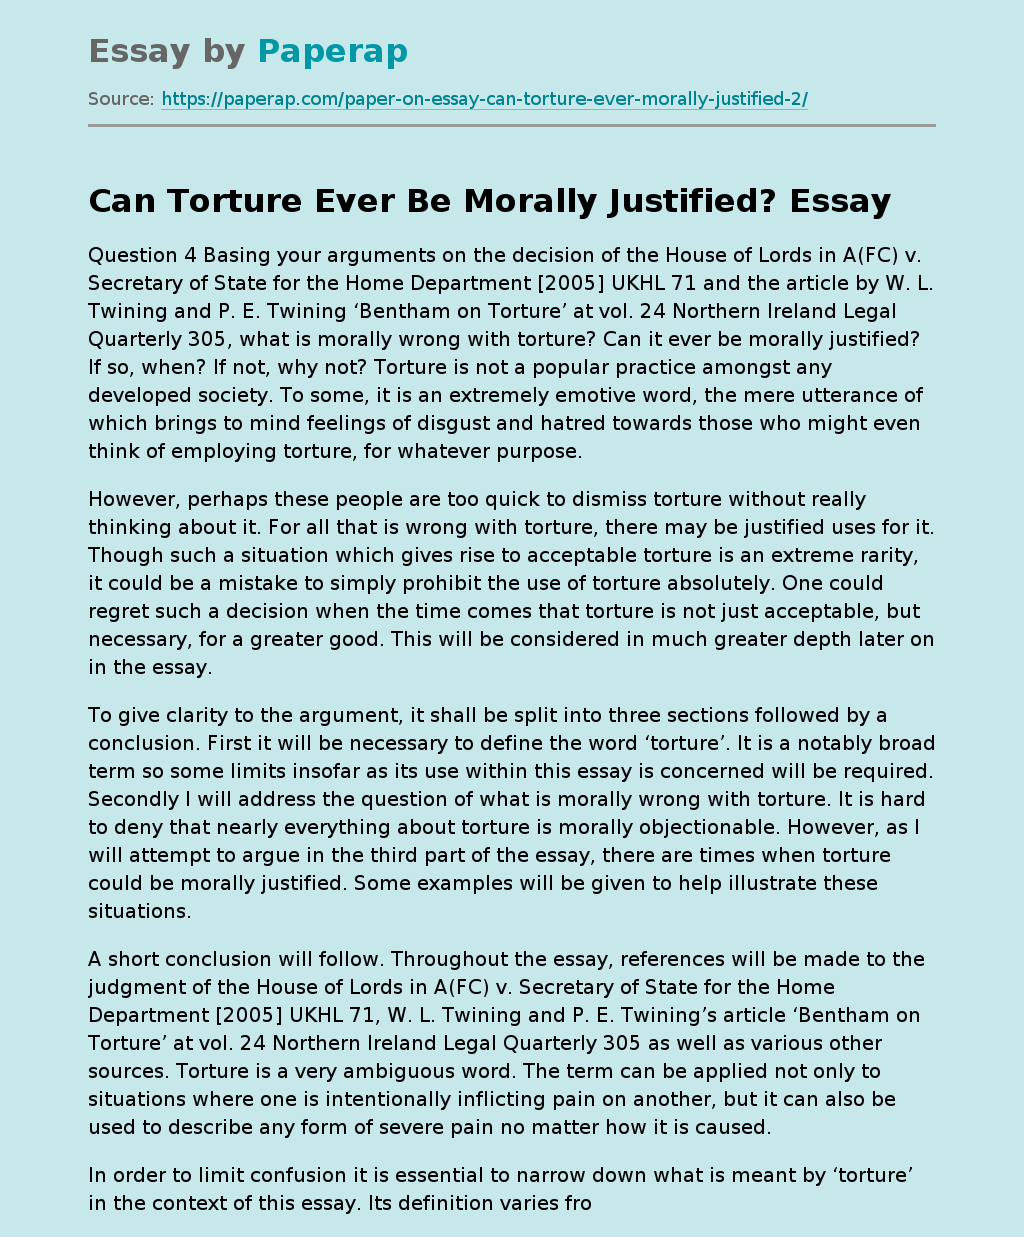 Can Torture Ever Be Morally Justified?